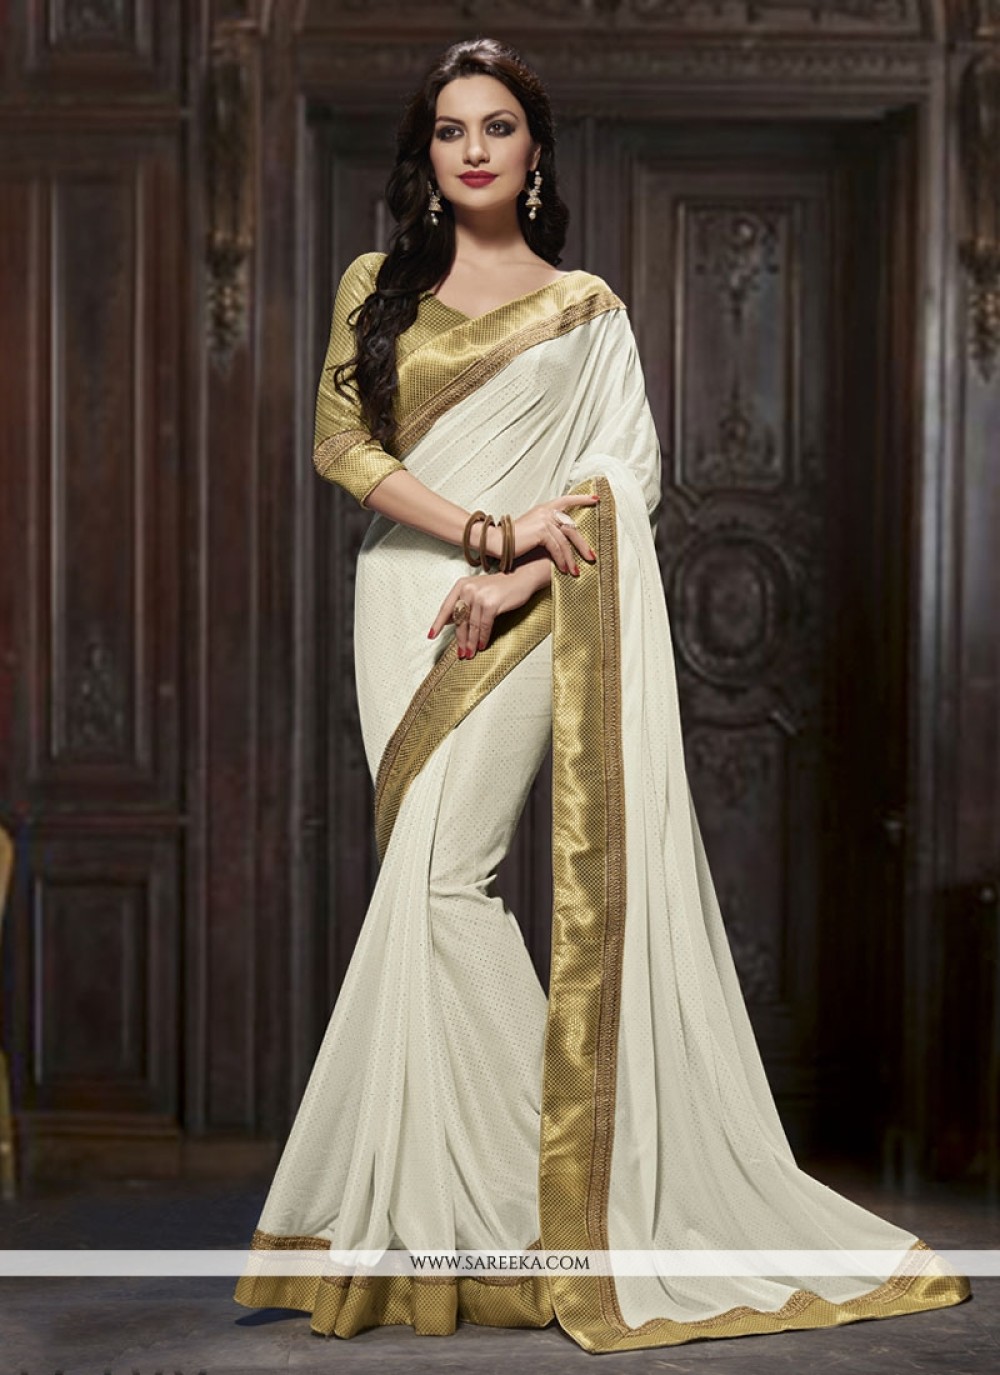 New Model Design Fancy Pure Silk Georgette Saree For Women/ Girls Latest  Design Party Wear Saree With Unstitched Blouse